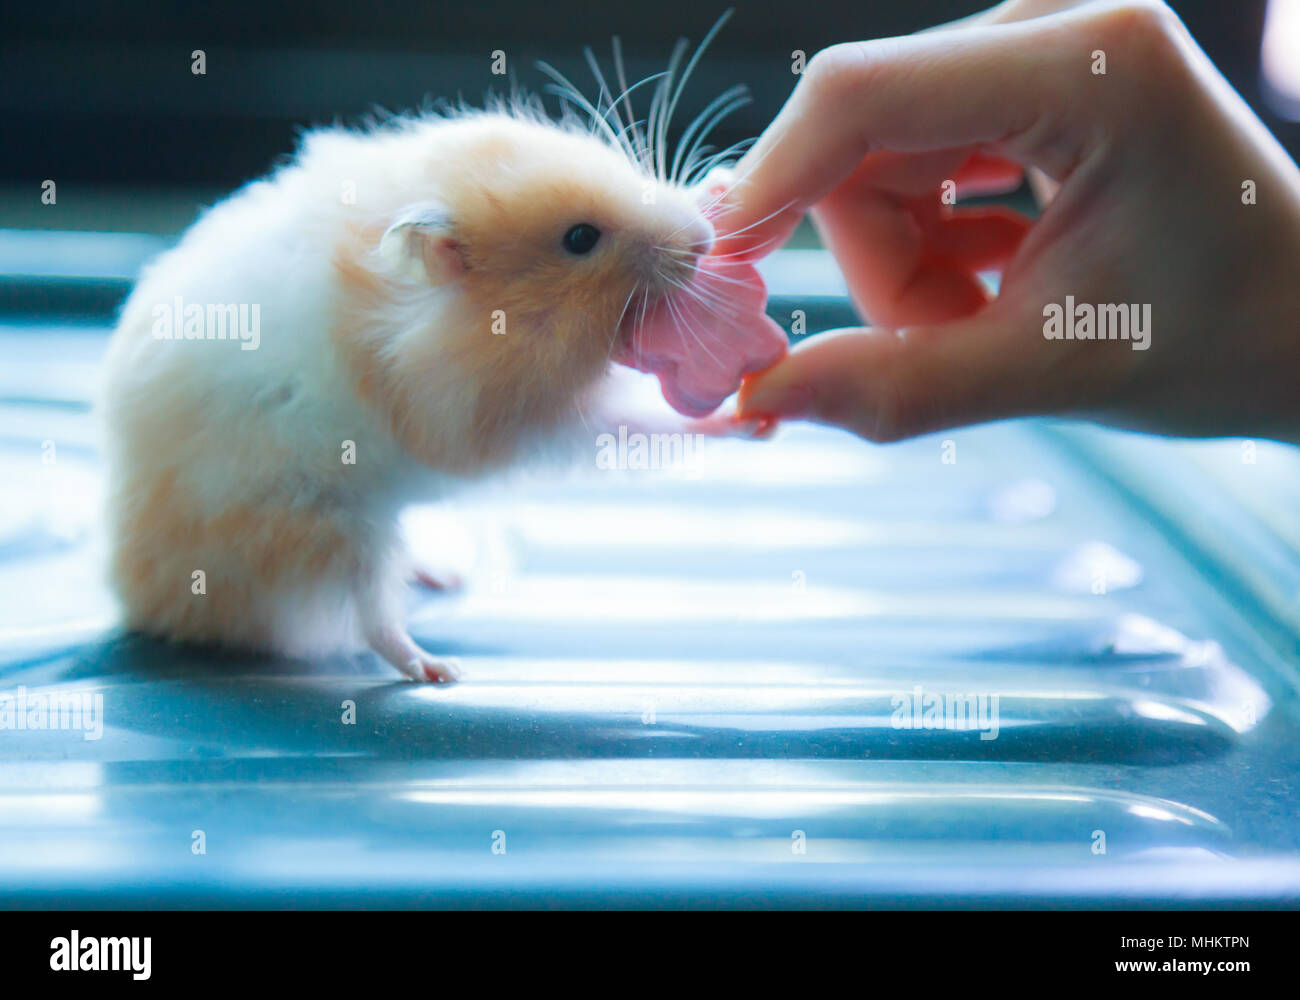 Front view of Cute Orange and White Syrian or Golden Hamster (Mesocricetus auratus) climbing on girl's hand. Taking Care, Mercy, Domestic Pet Animal C Stock Photo